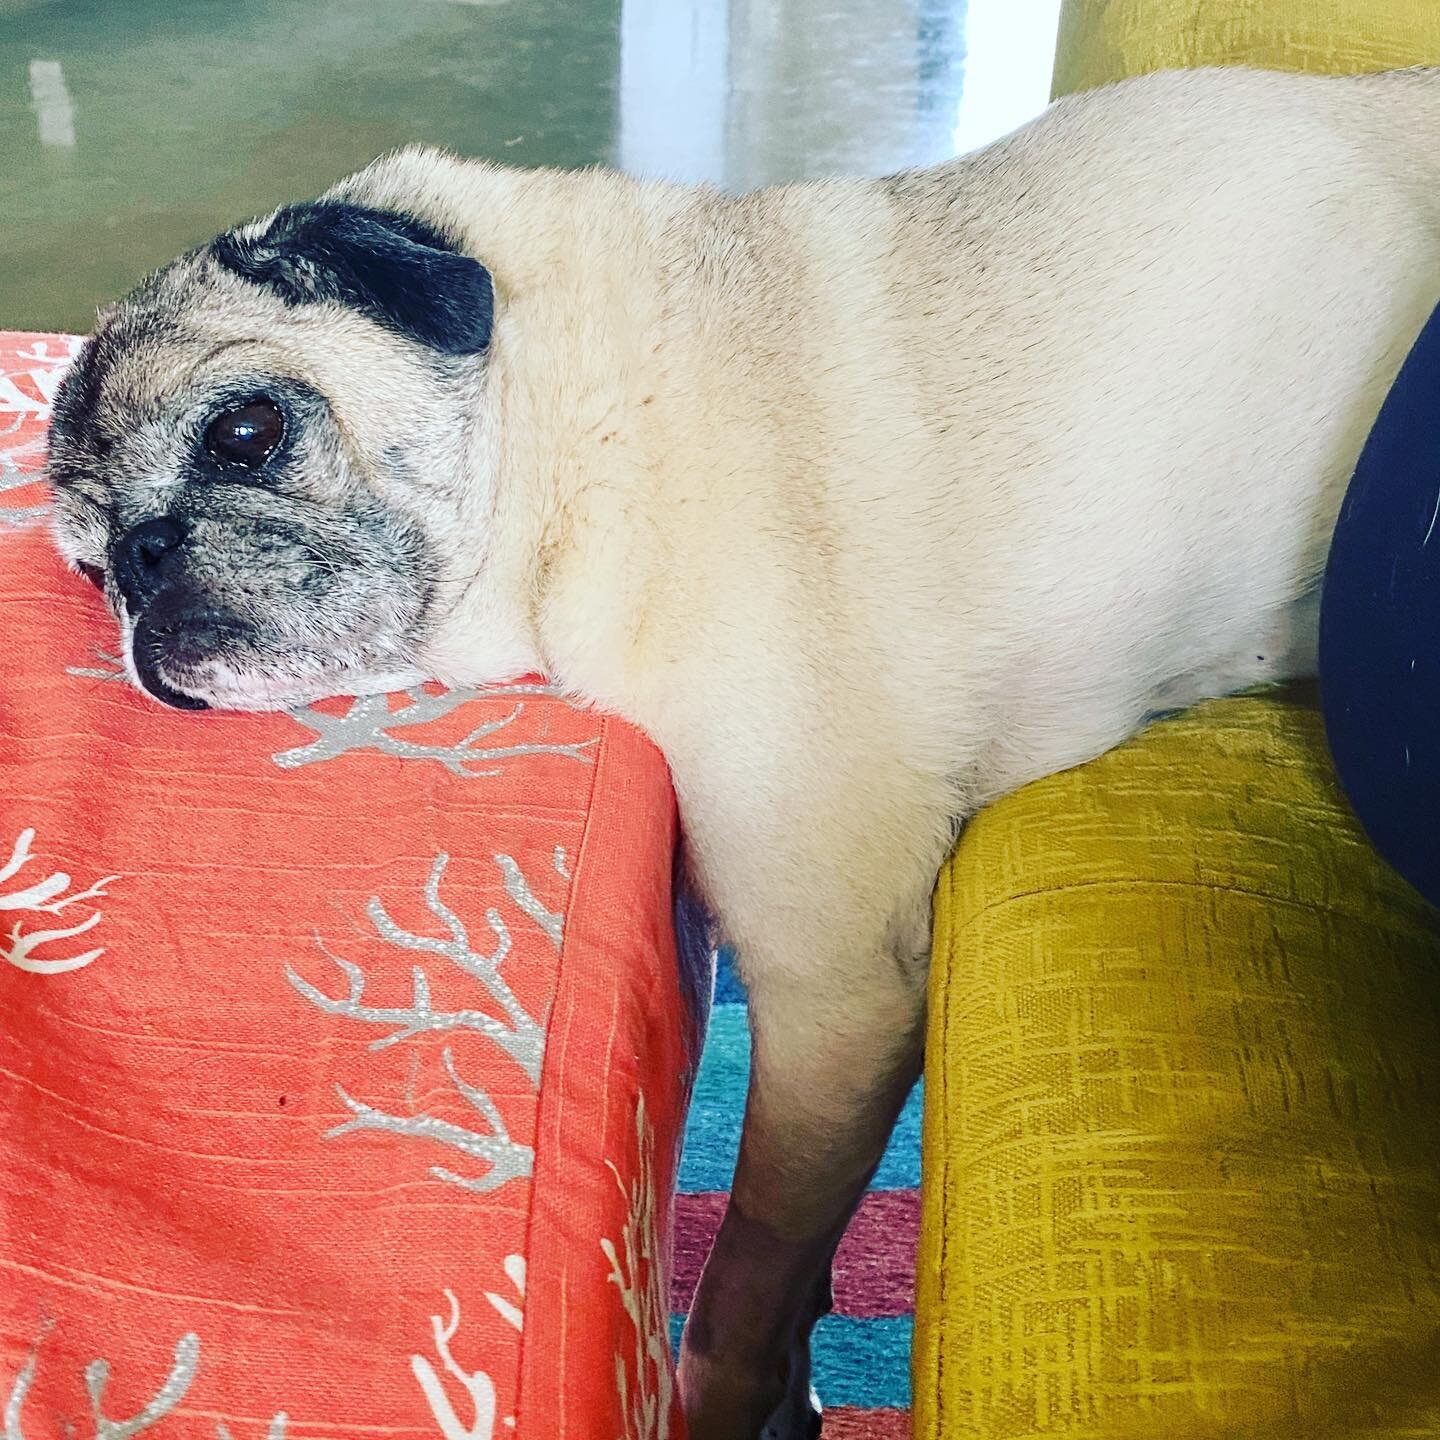 Who doesn&rsquo;t take an open-eyed nap with your front legs dangling straight down? This doggo makes me laugh. 
...
...
#pug #pugsofinstagram #dtladogs